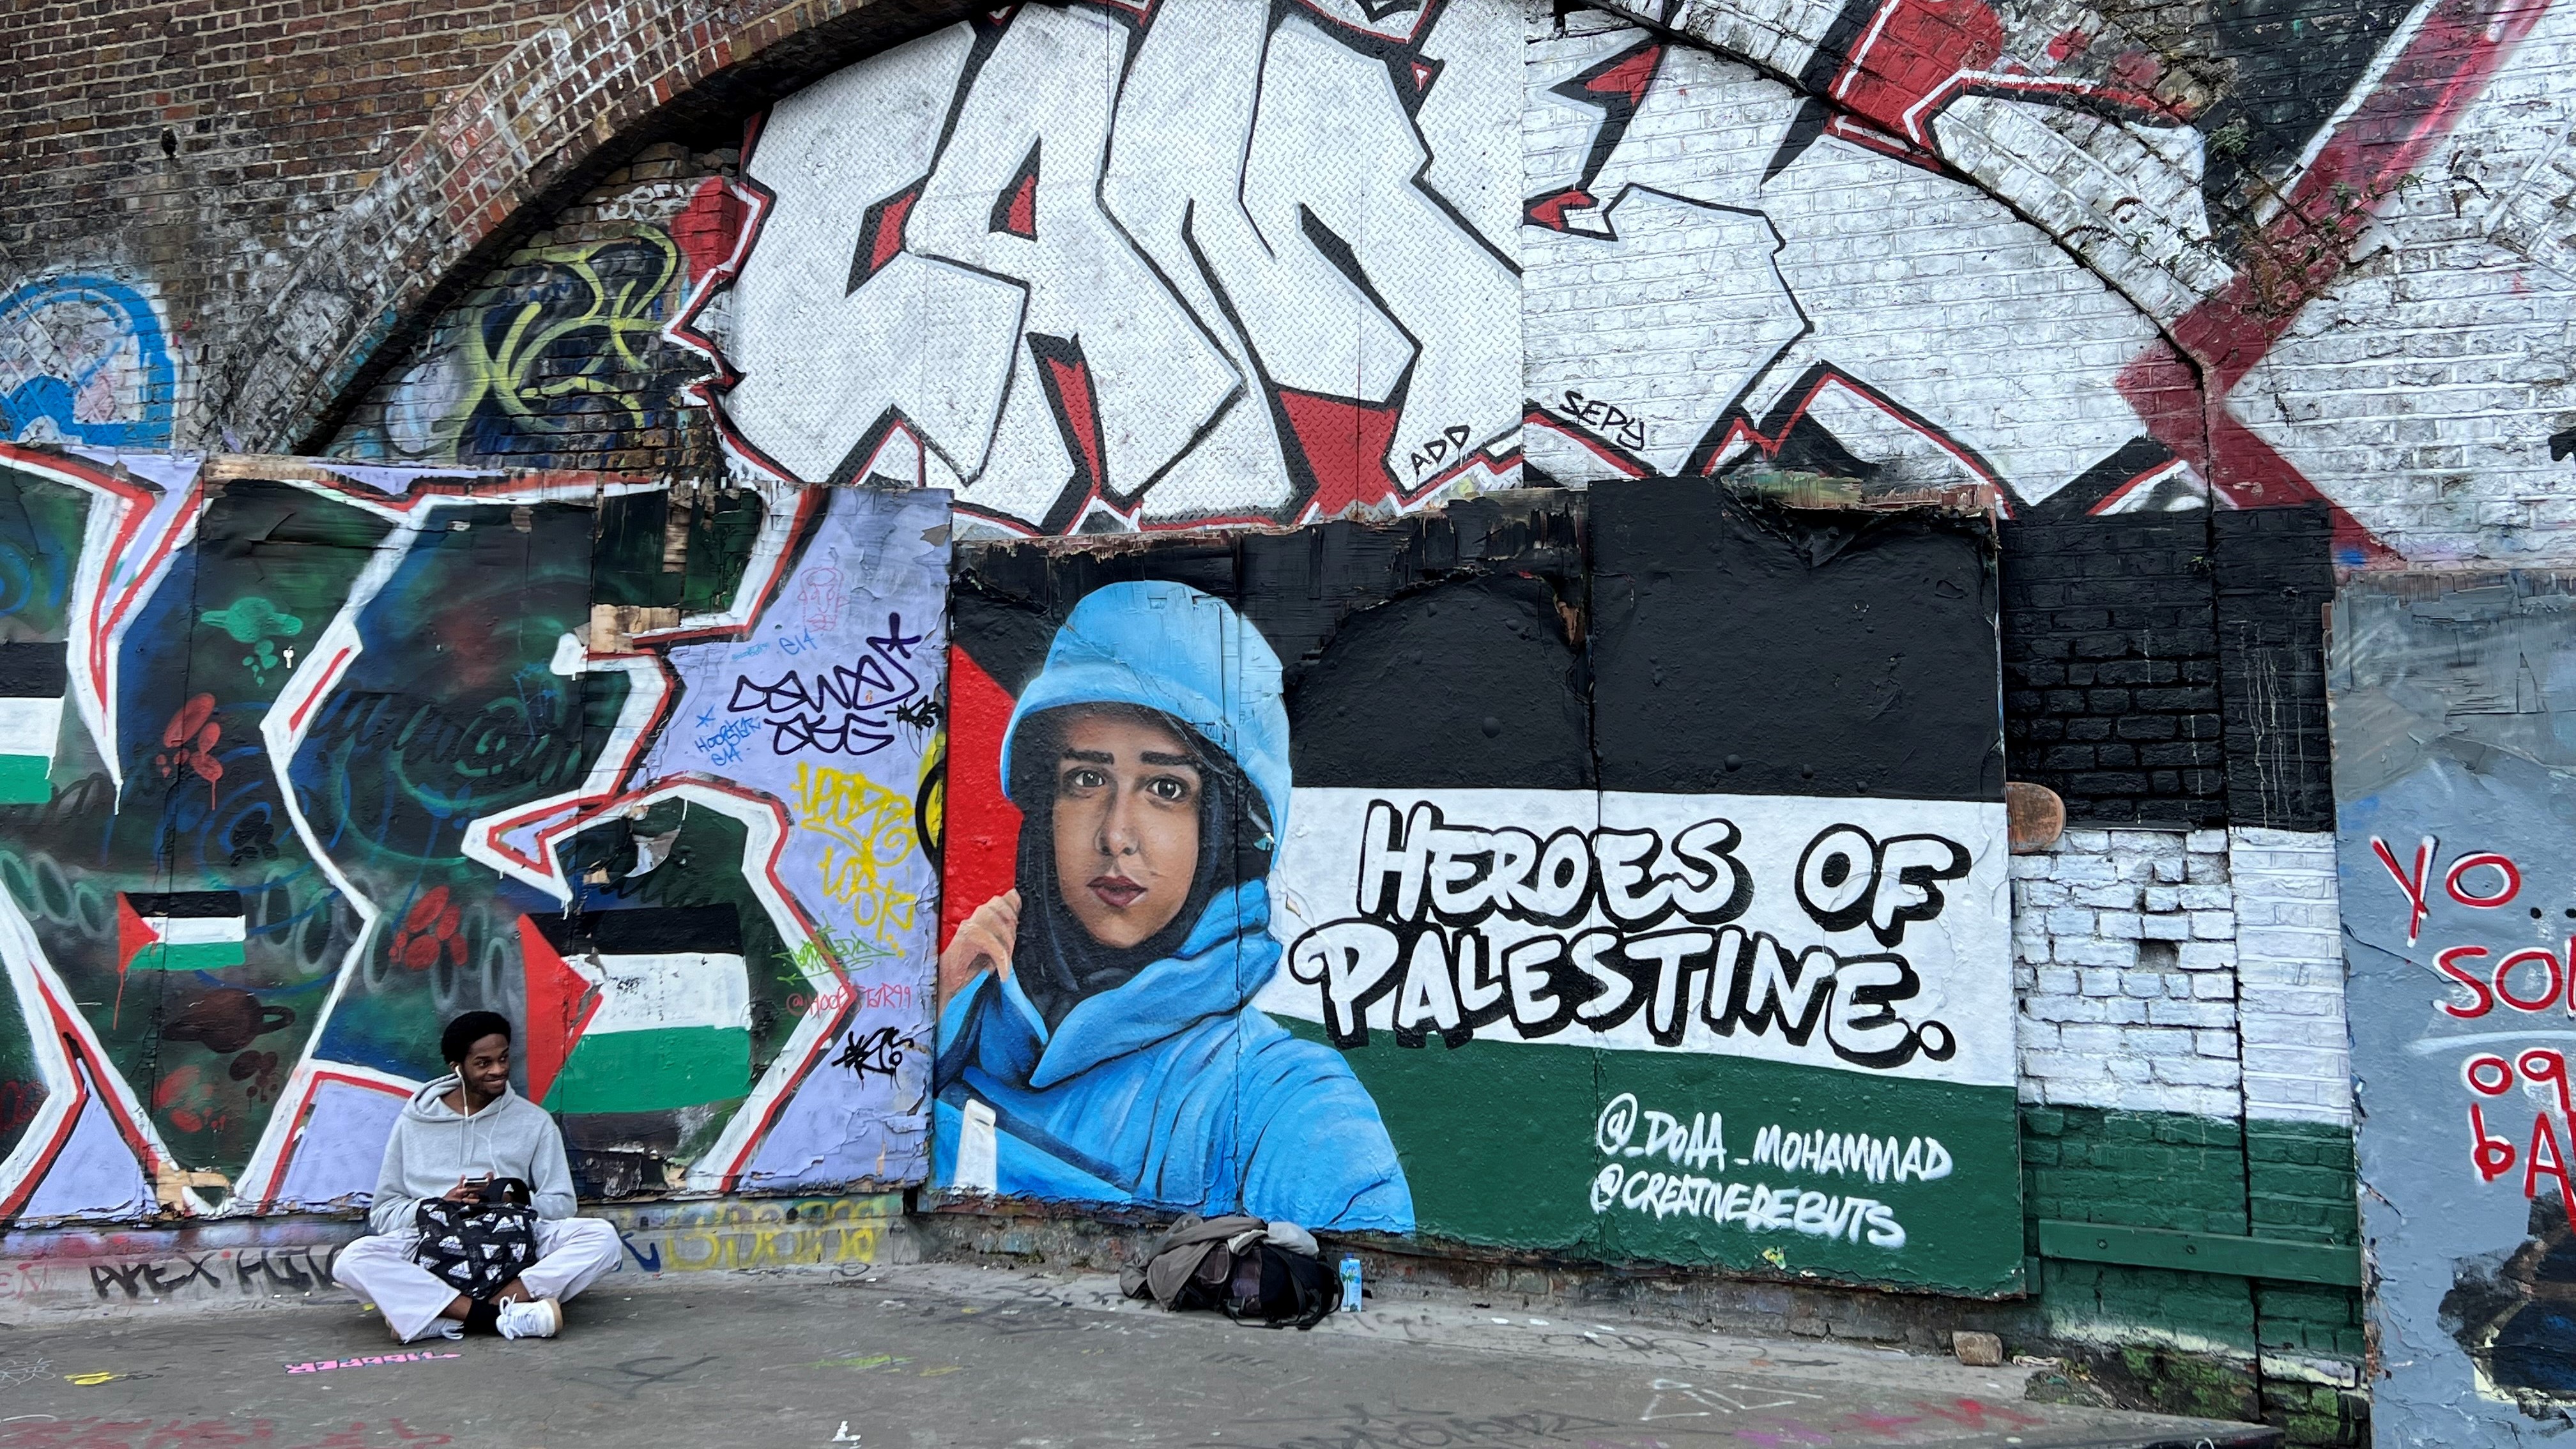 Pro-Palestine murals have cropped up across Tower Hamlets in support of 